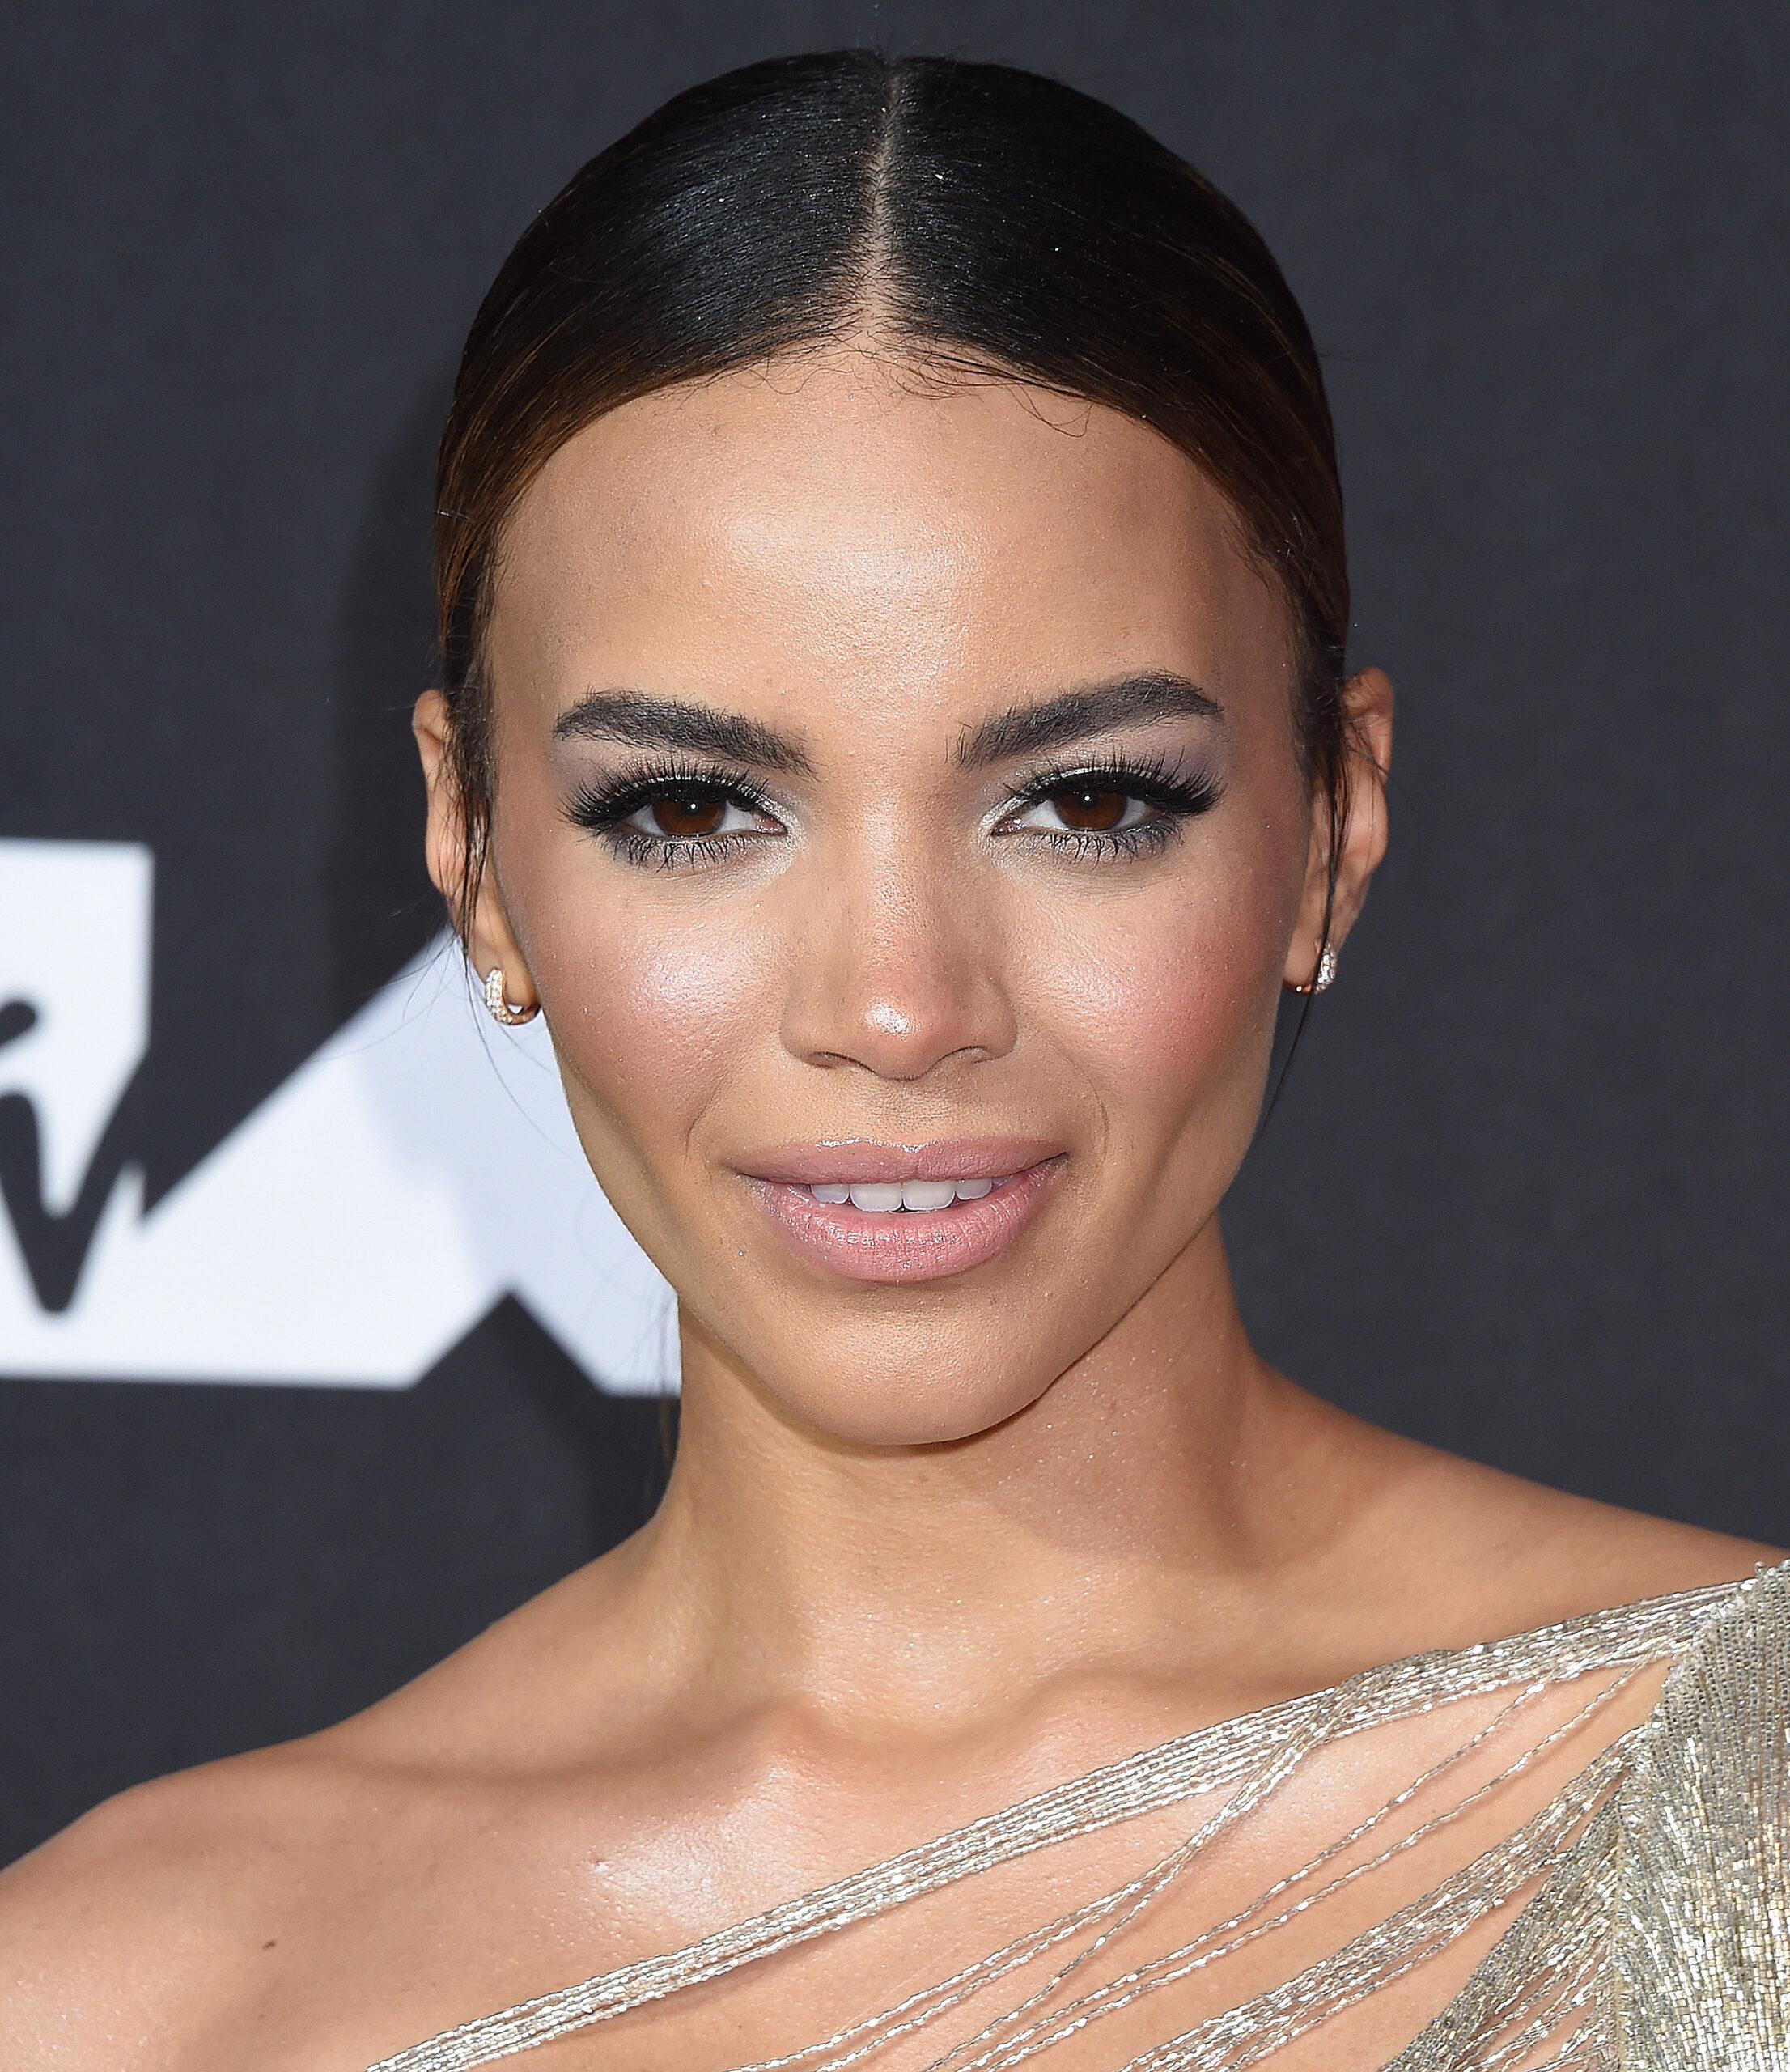 Leslie Grace at the 2021 MTV VMAs at the Barclays Center Brooklyn in New York City